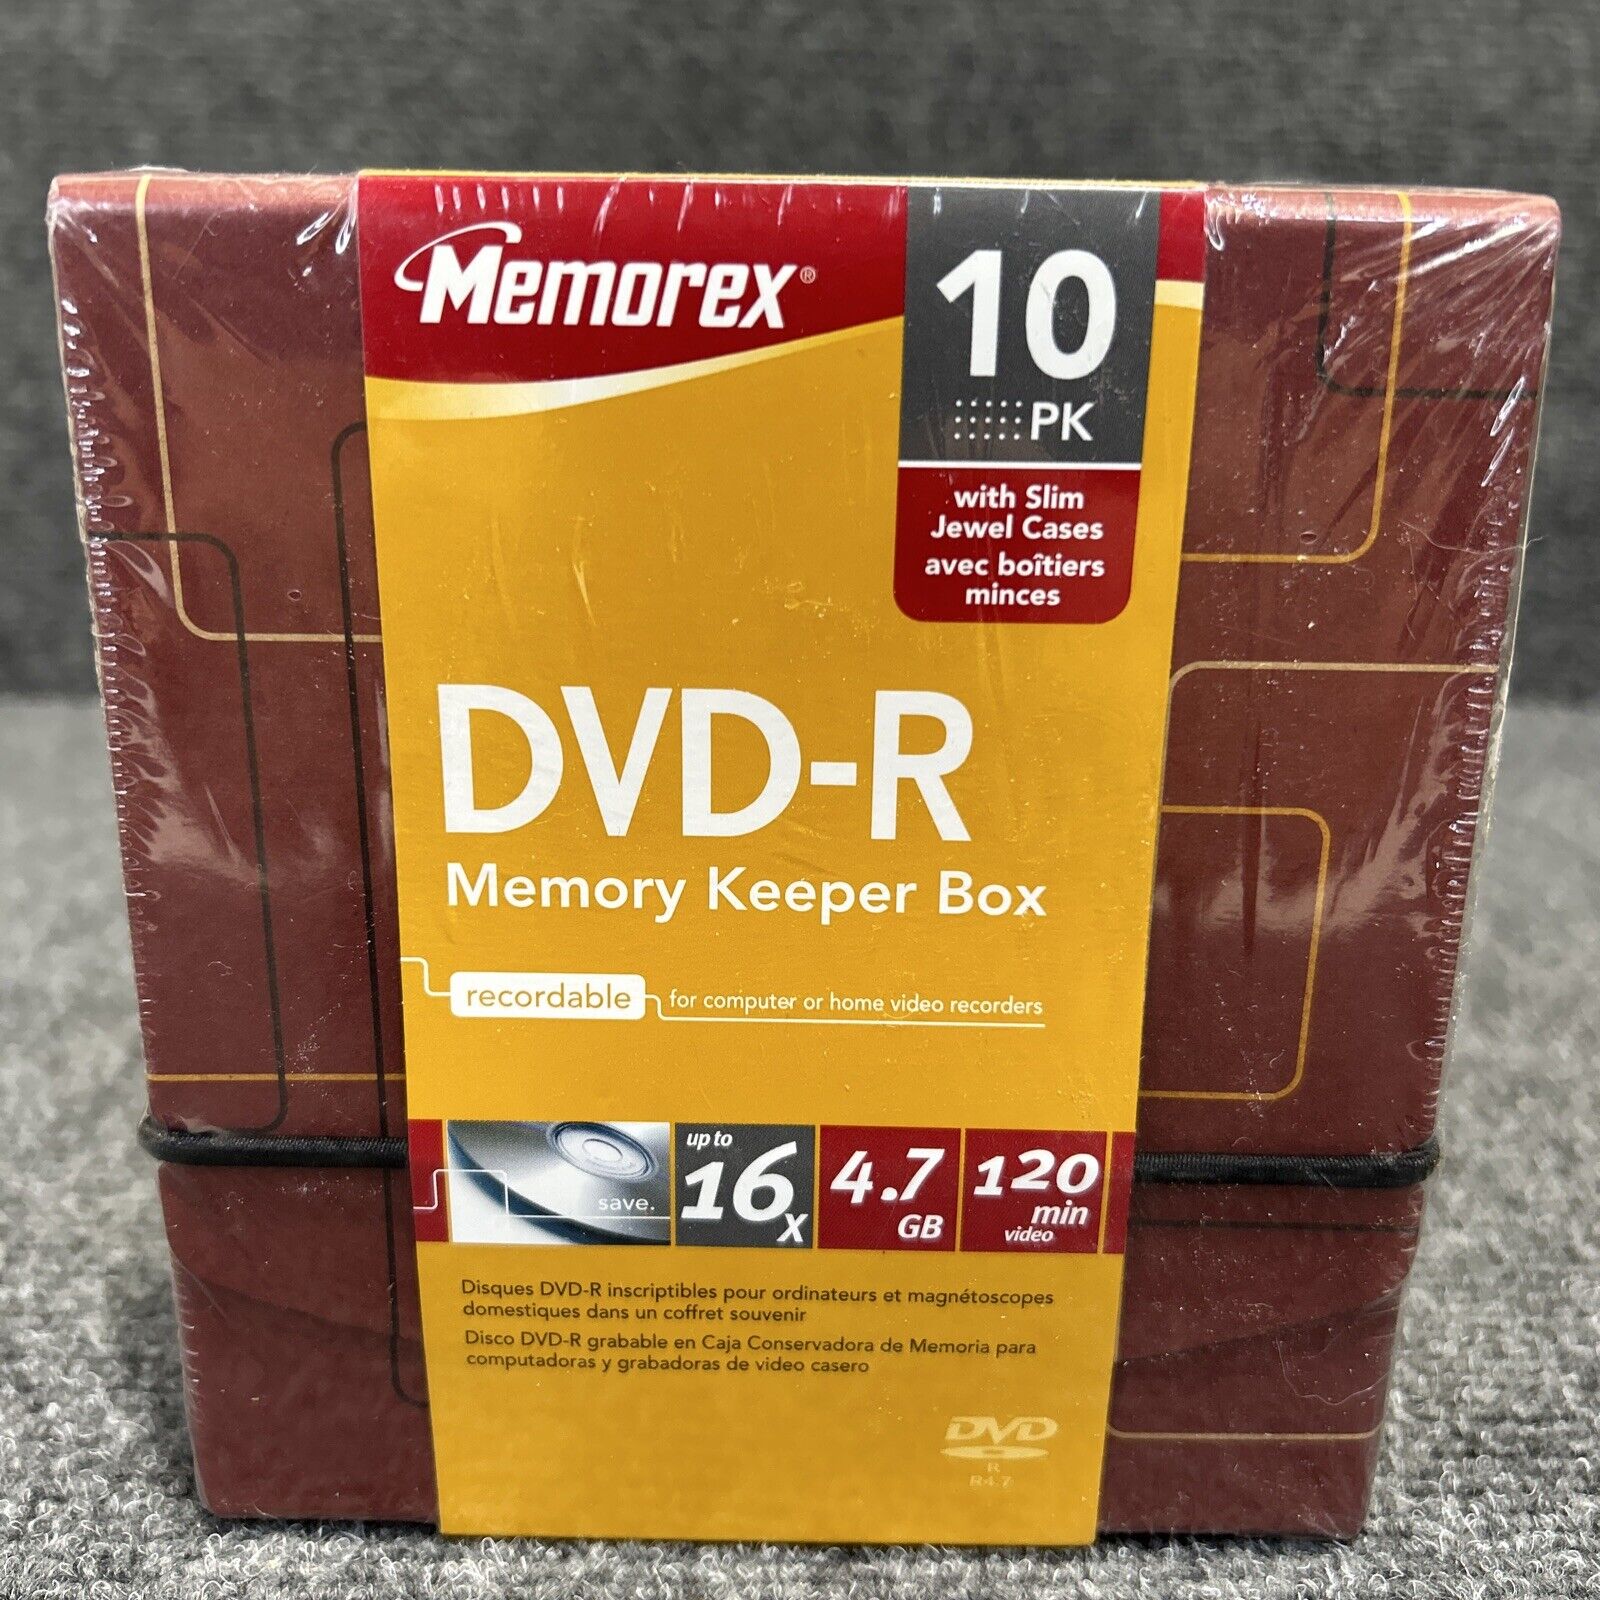 Memorex DVD-R Pack of 10 Memory Keeper Box With Jewel Cases 4.7 GB, 120 Min.